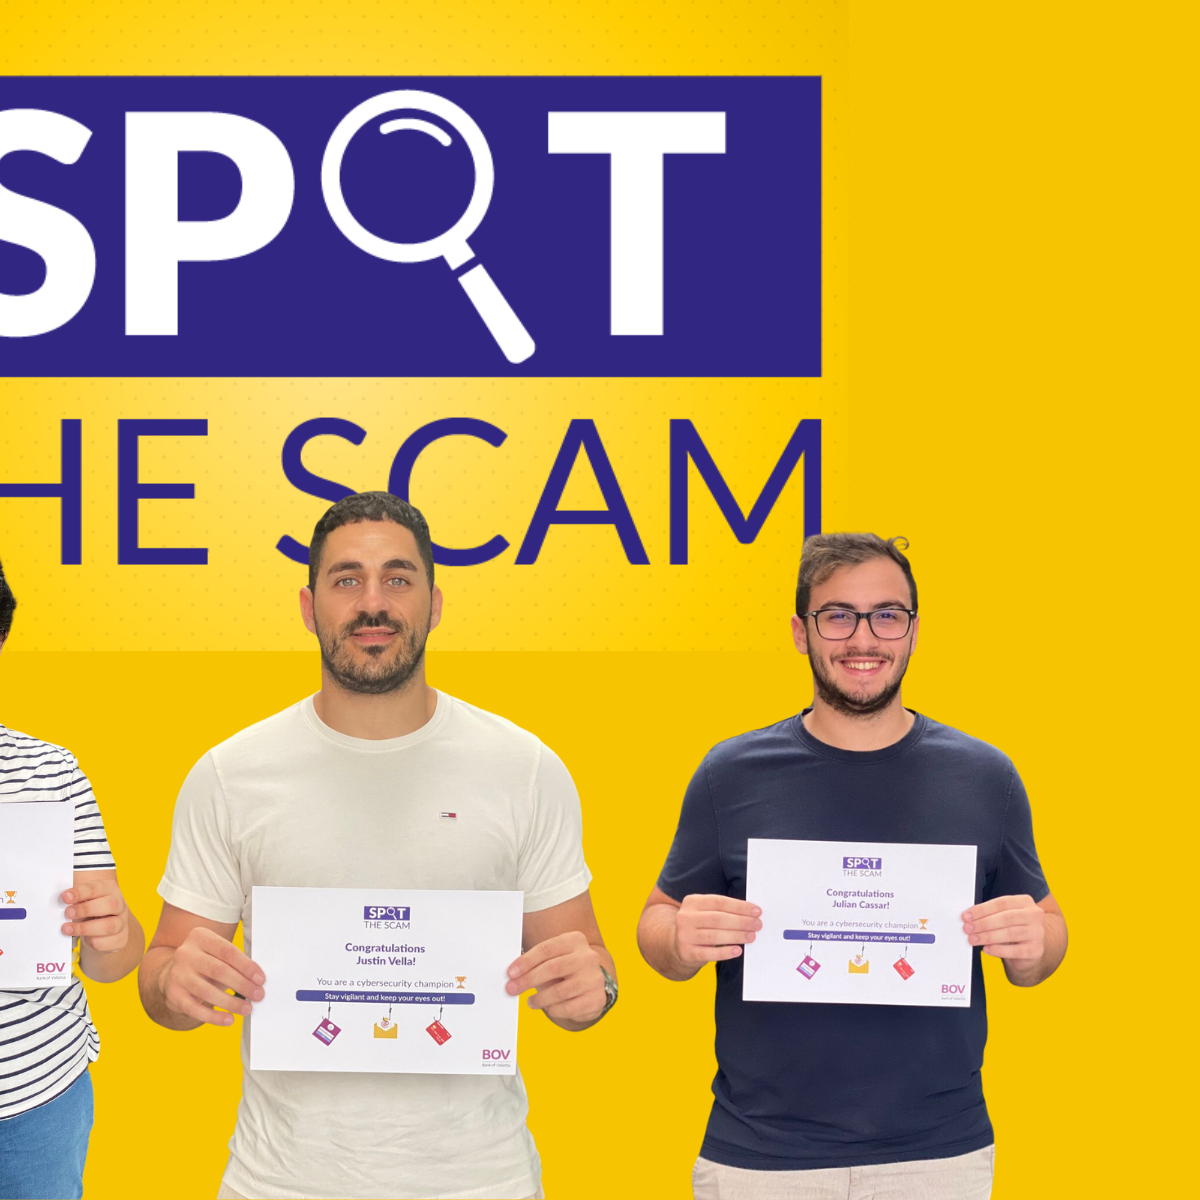 BOV keeps up momentum in educating customers about scams